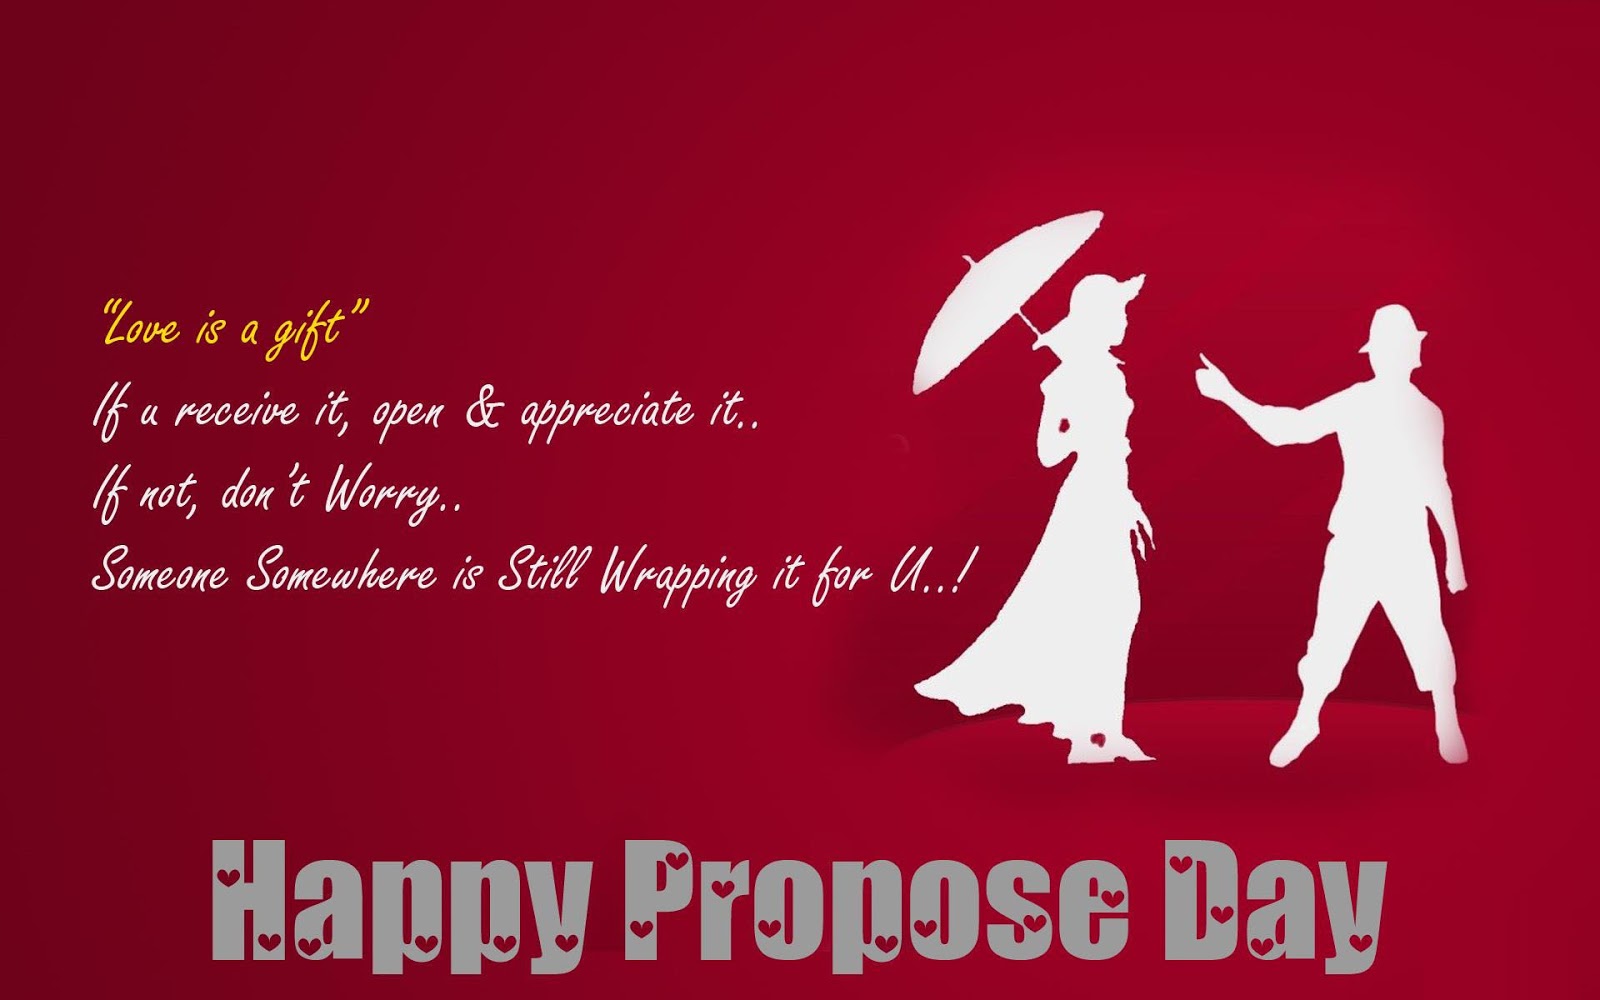 Top HD wallpapers of happy valentines day for husband & wife